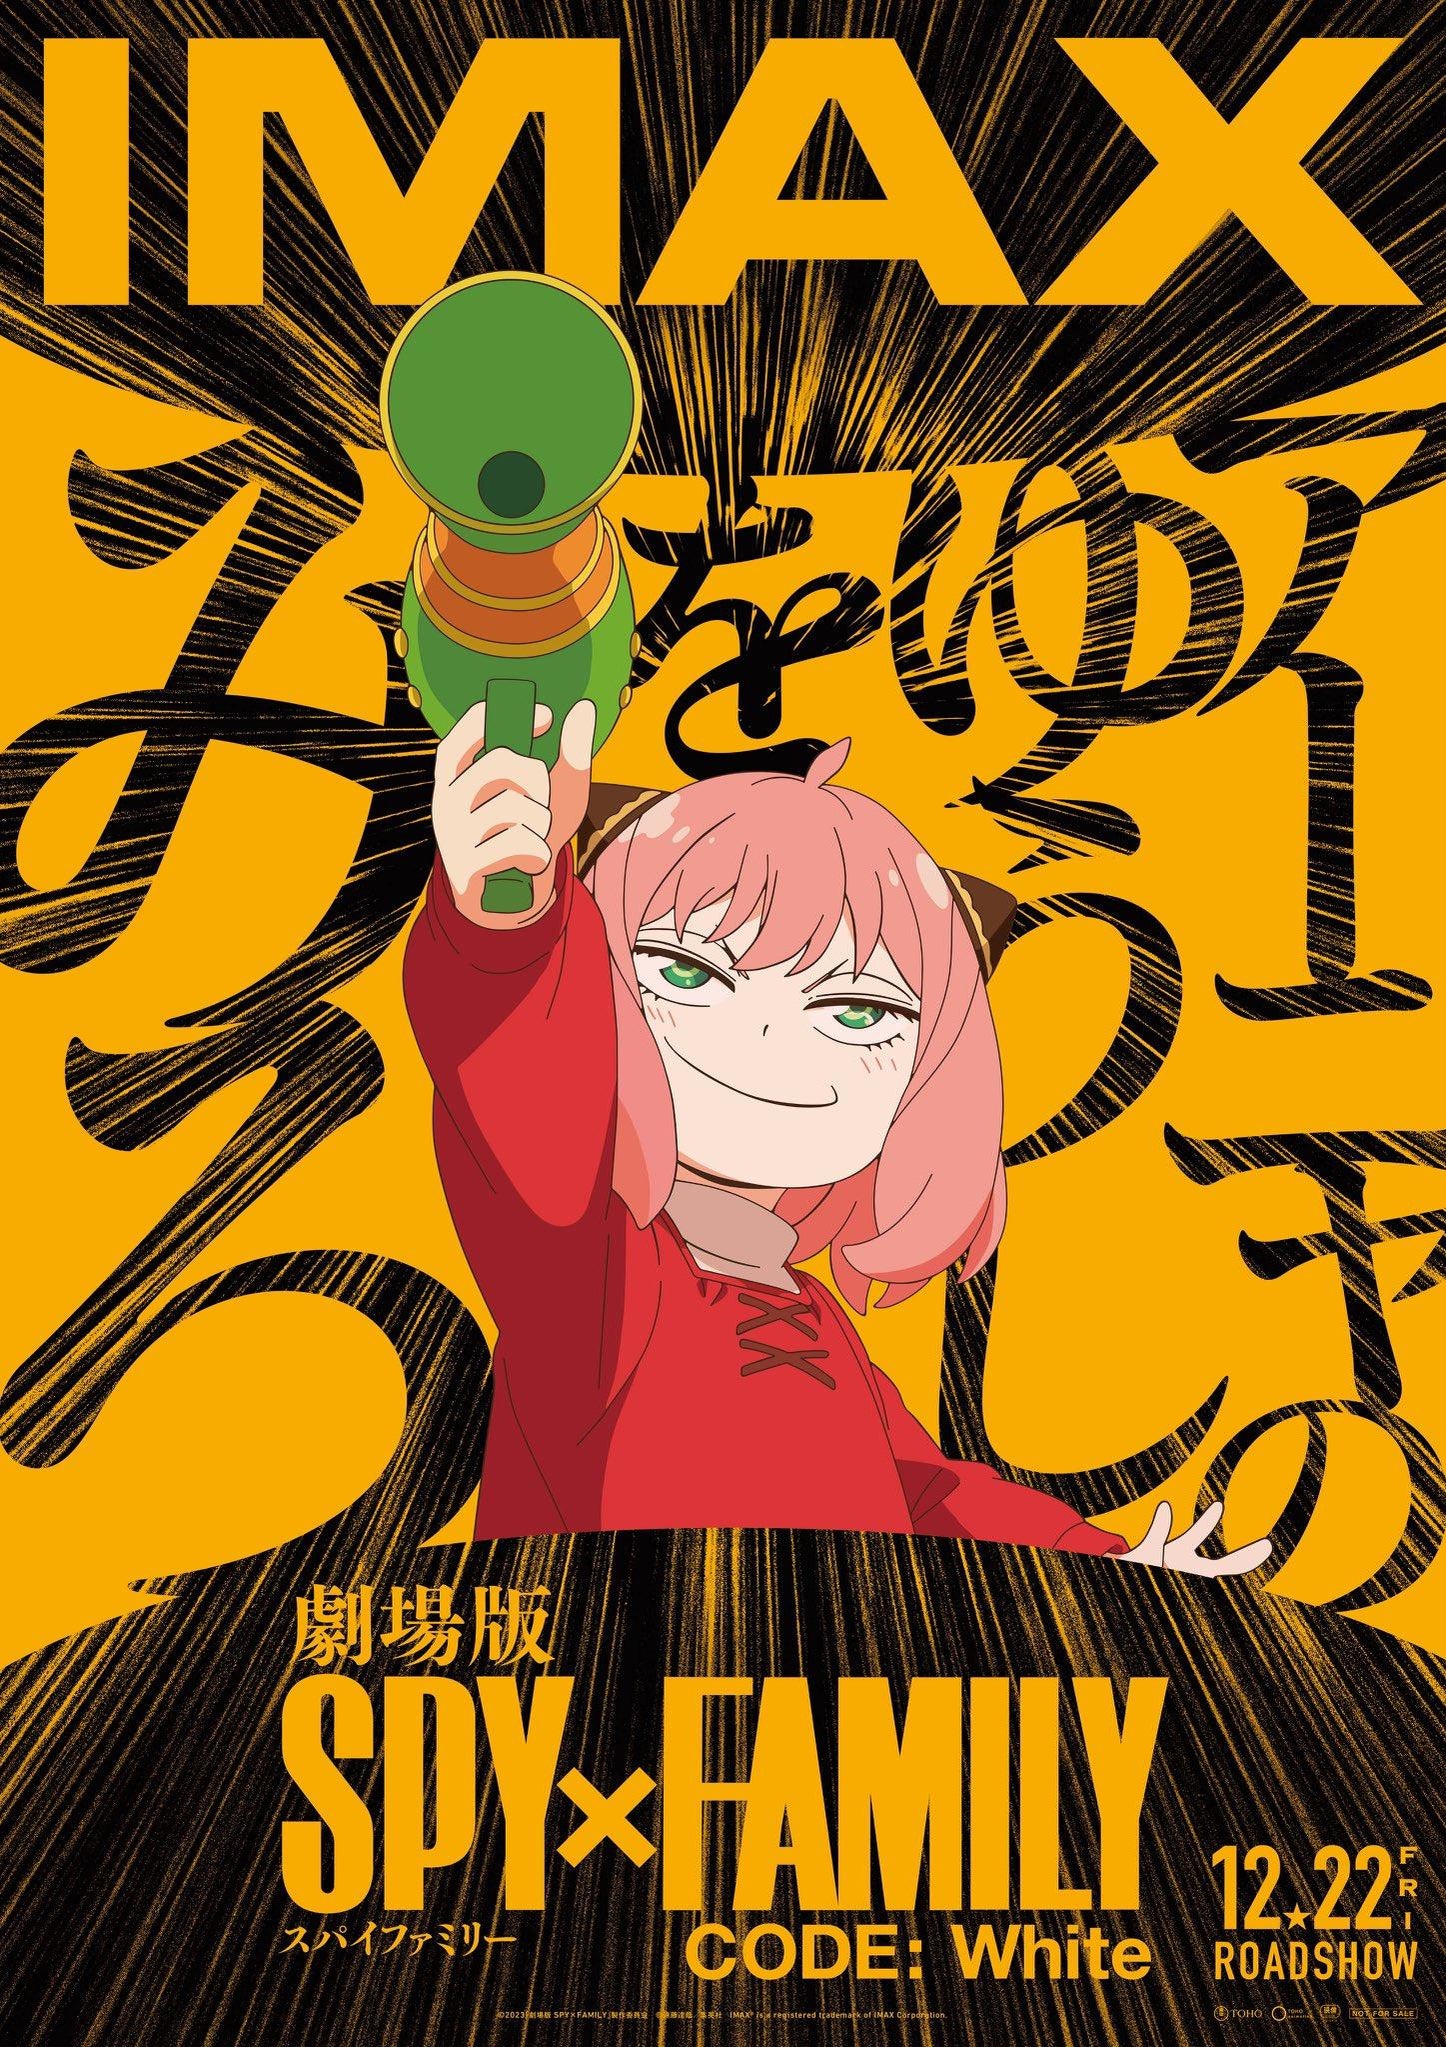 The Forger Family Takes Action in SPY x FAMILY CODE: White Anime